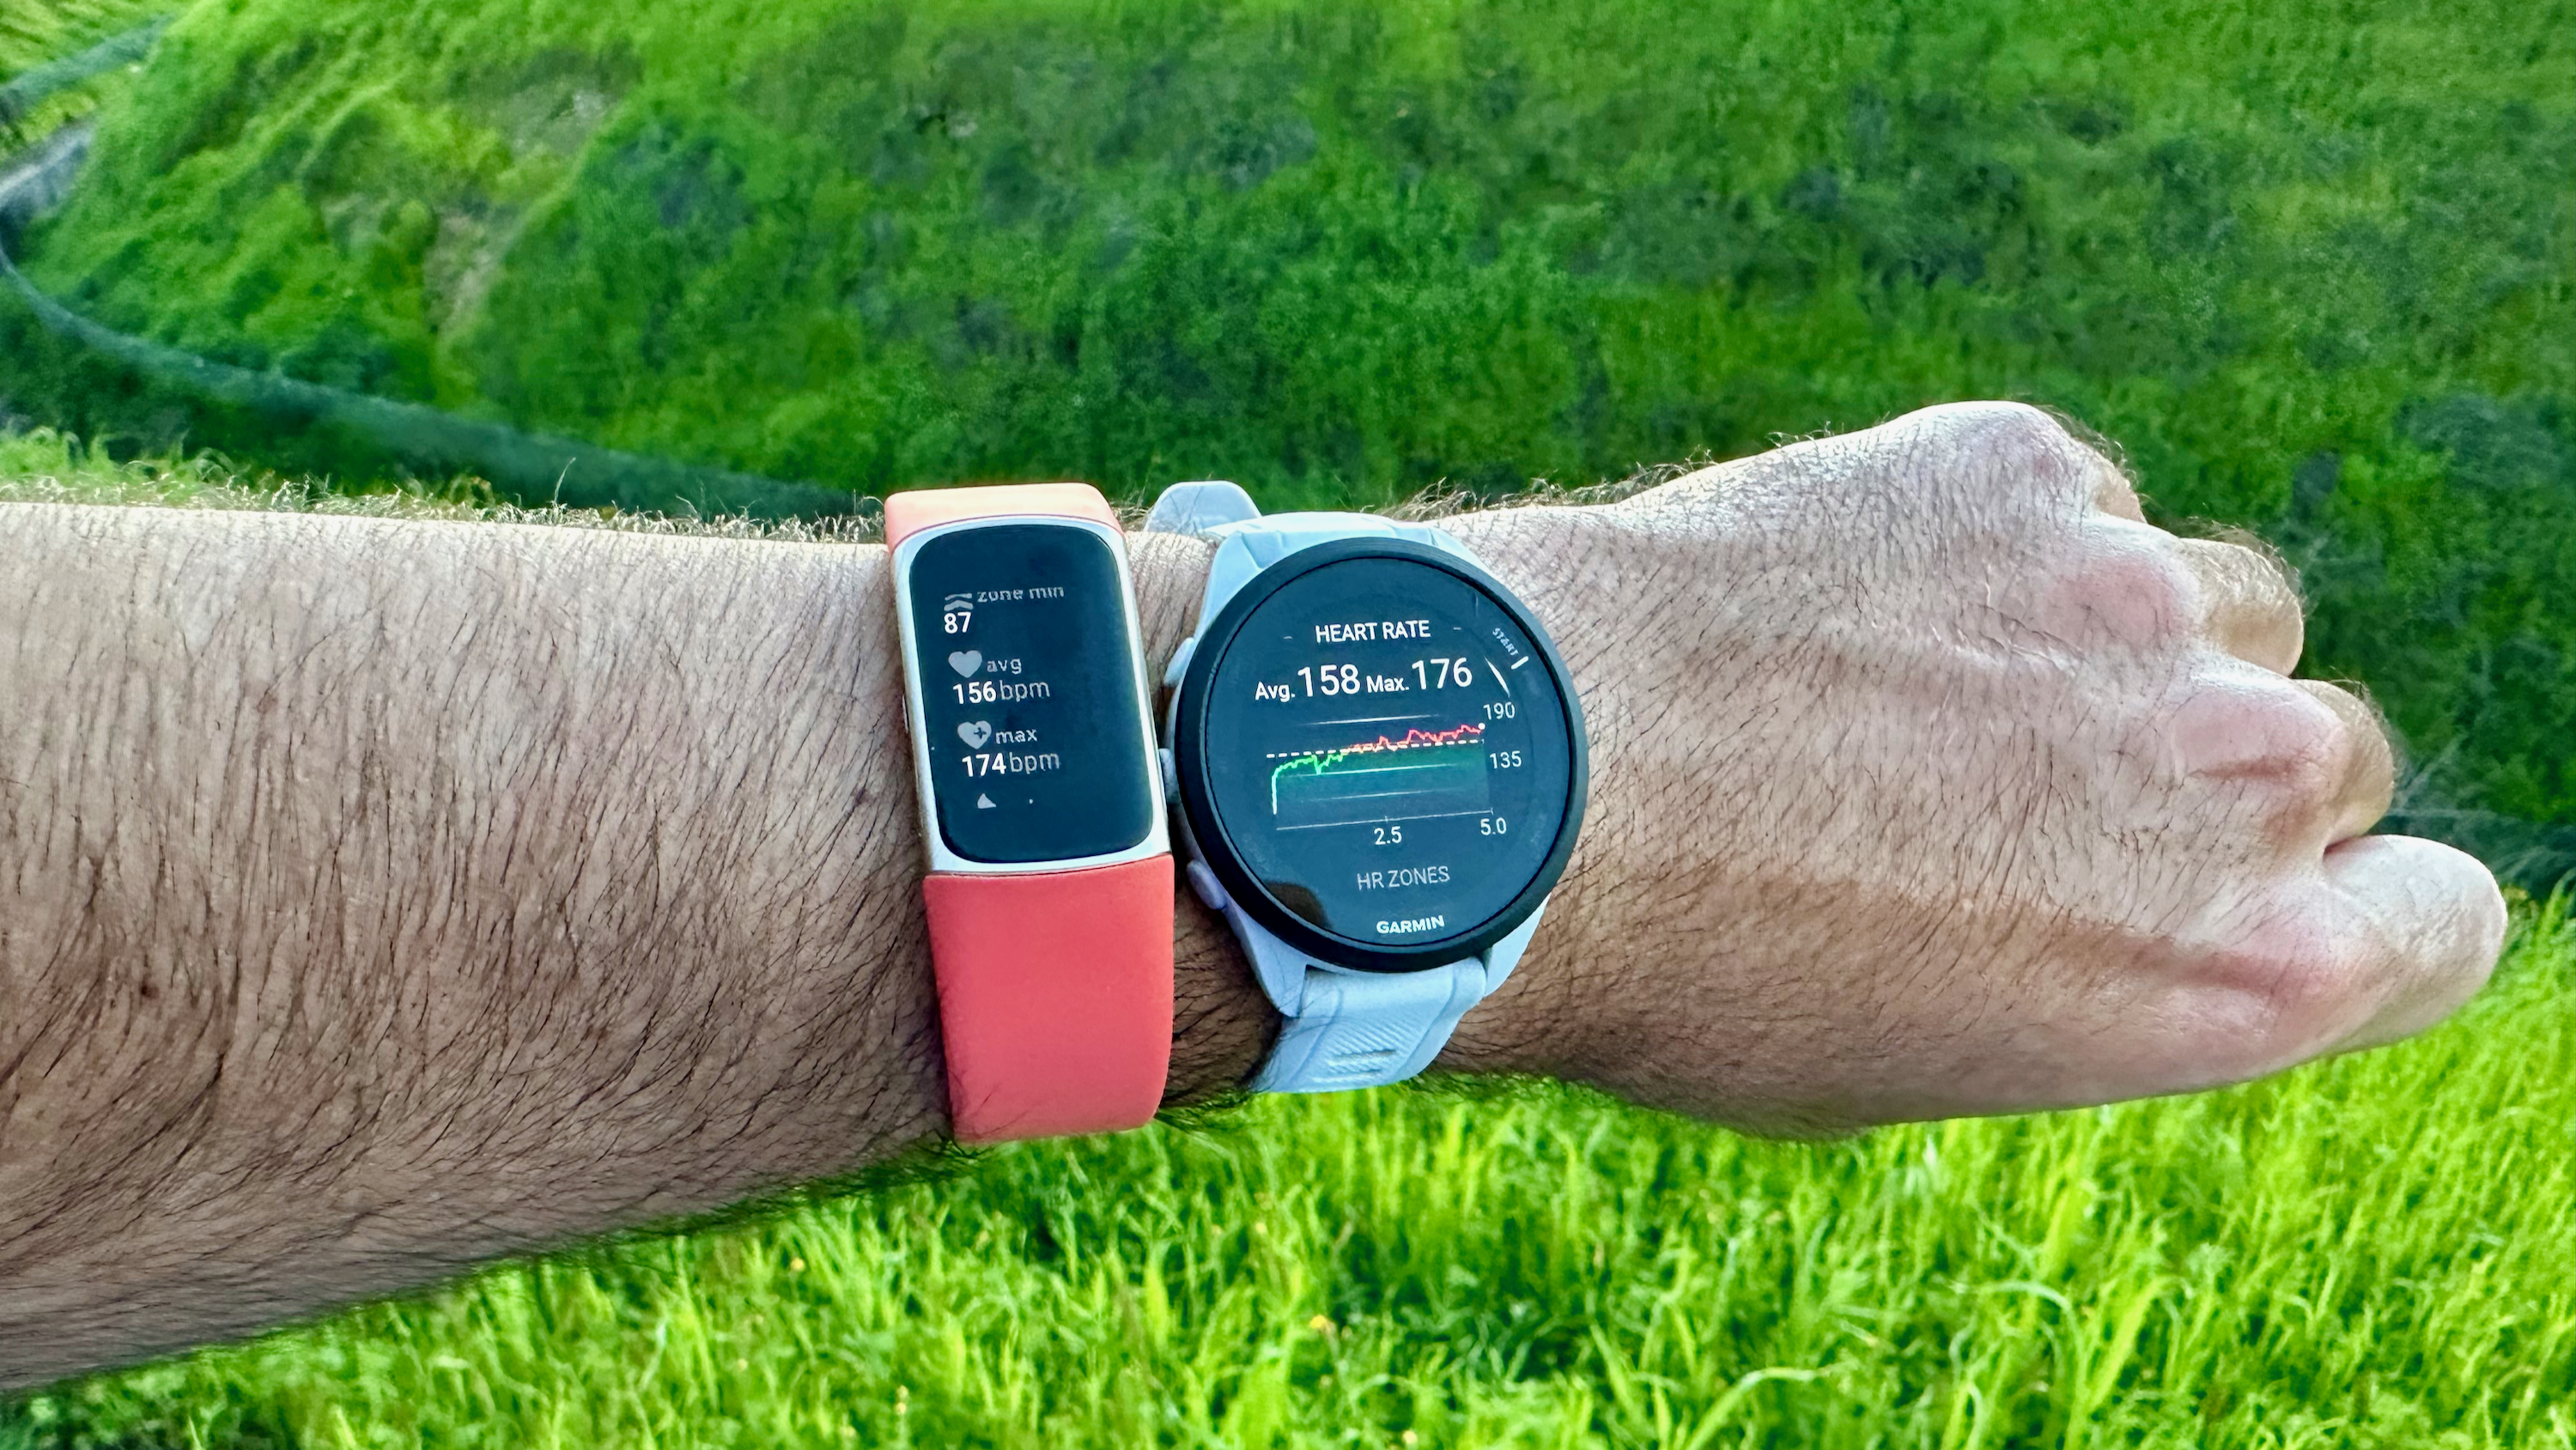 The Garmin Forerunner 165 and Fitbit Charge 6 worn on one wrist, showing a post-run summary.